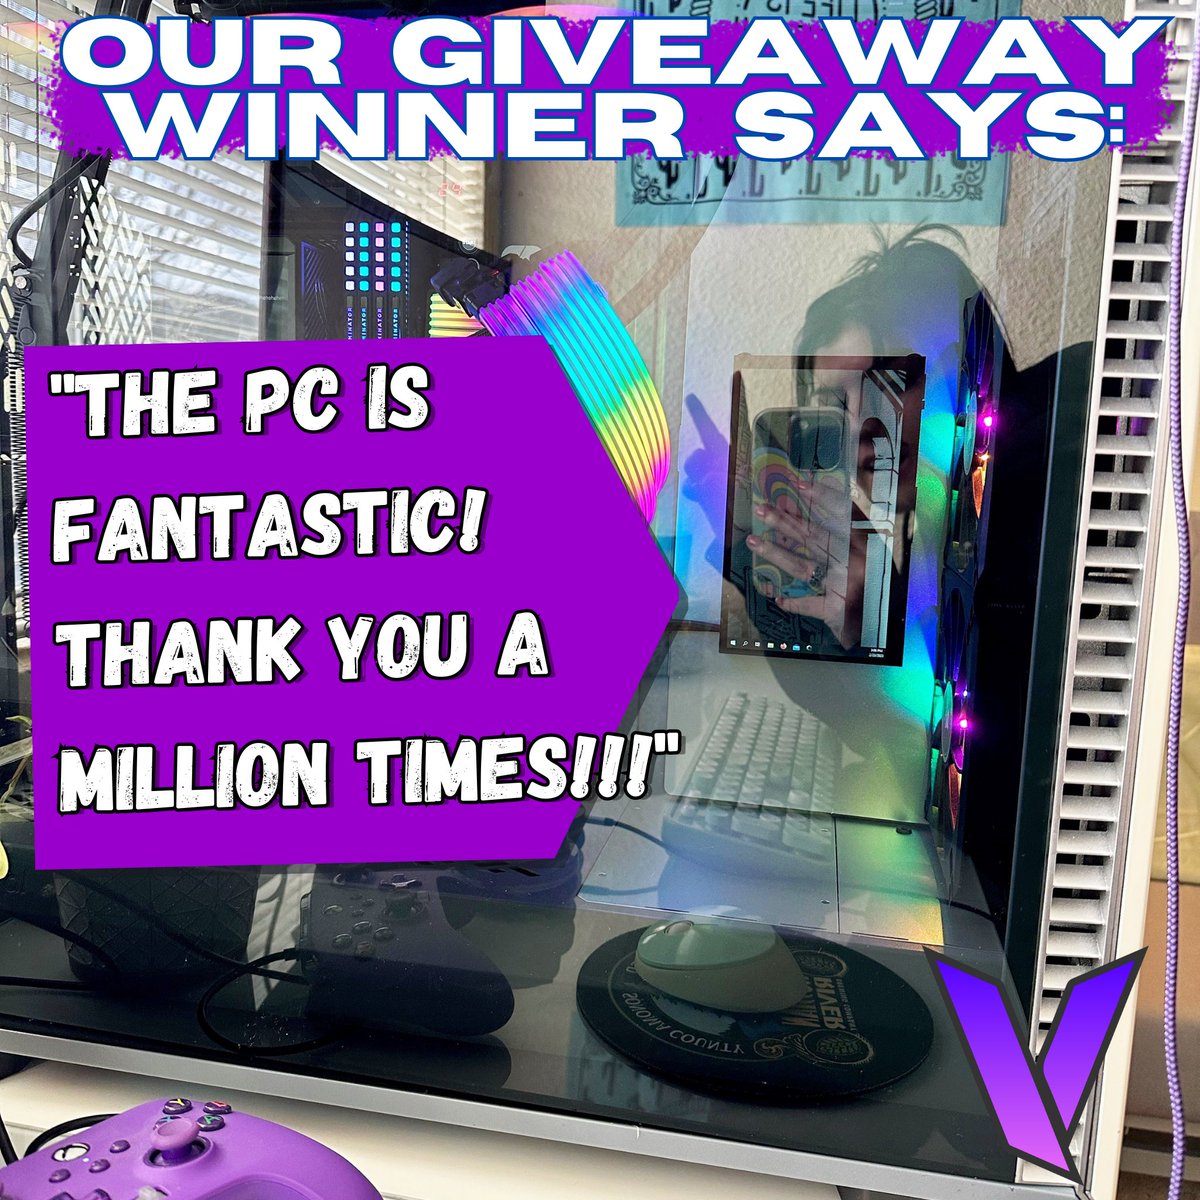 We received some pics and a great note from the winner of the retro-inspired gaming PC we built for the #ASUSPCDIY event a few months ago!

FOLLOW US to get advance notice on our next giveaway...

 #Velztorm #ASUS #VelztormReviews #Velztormreview #custompc #custompcs  #pcgiveaway